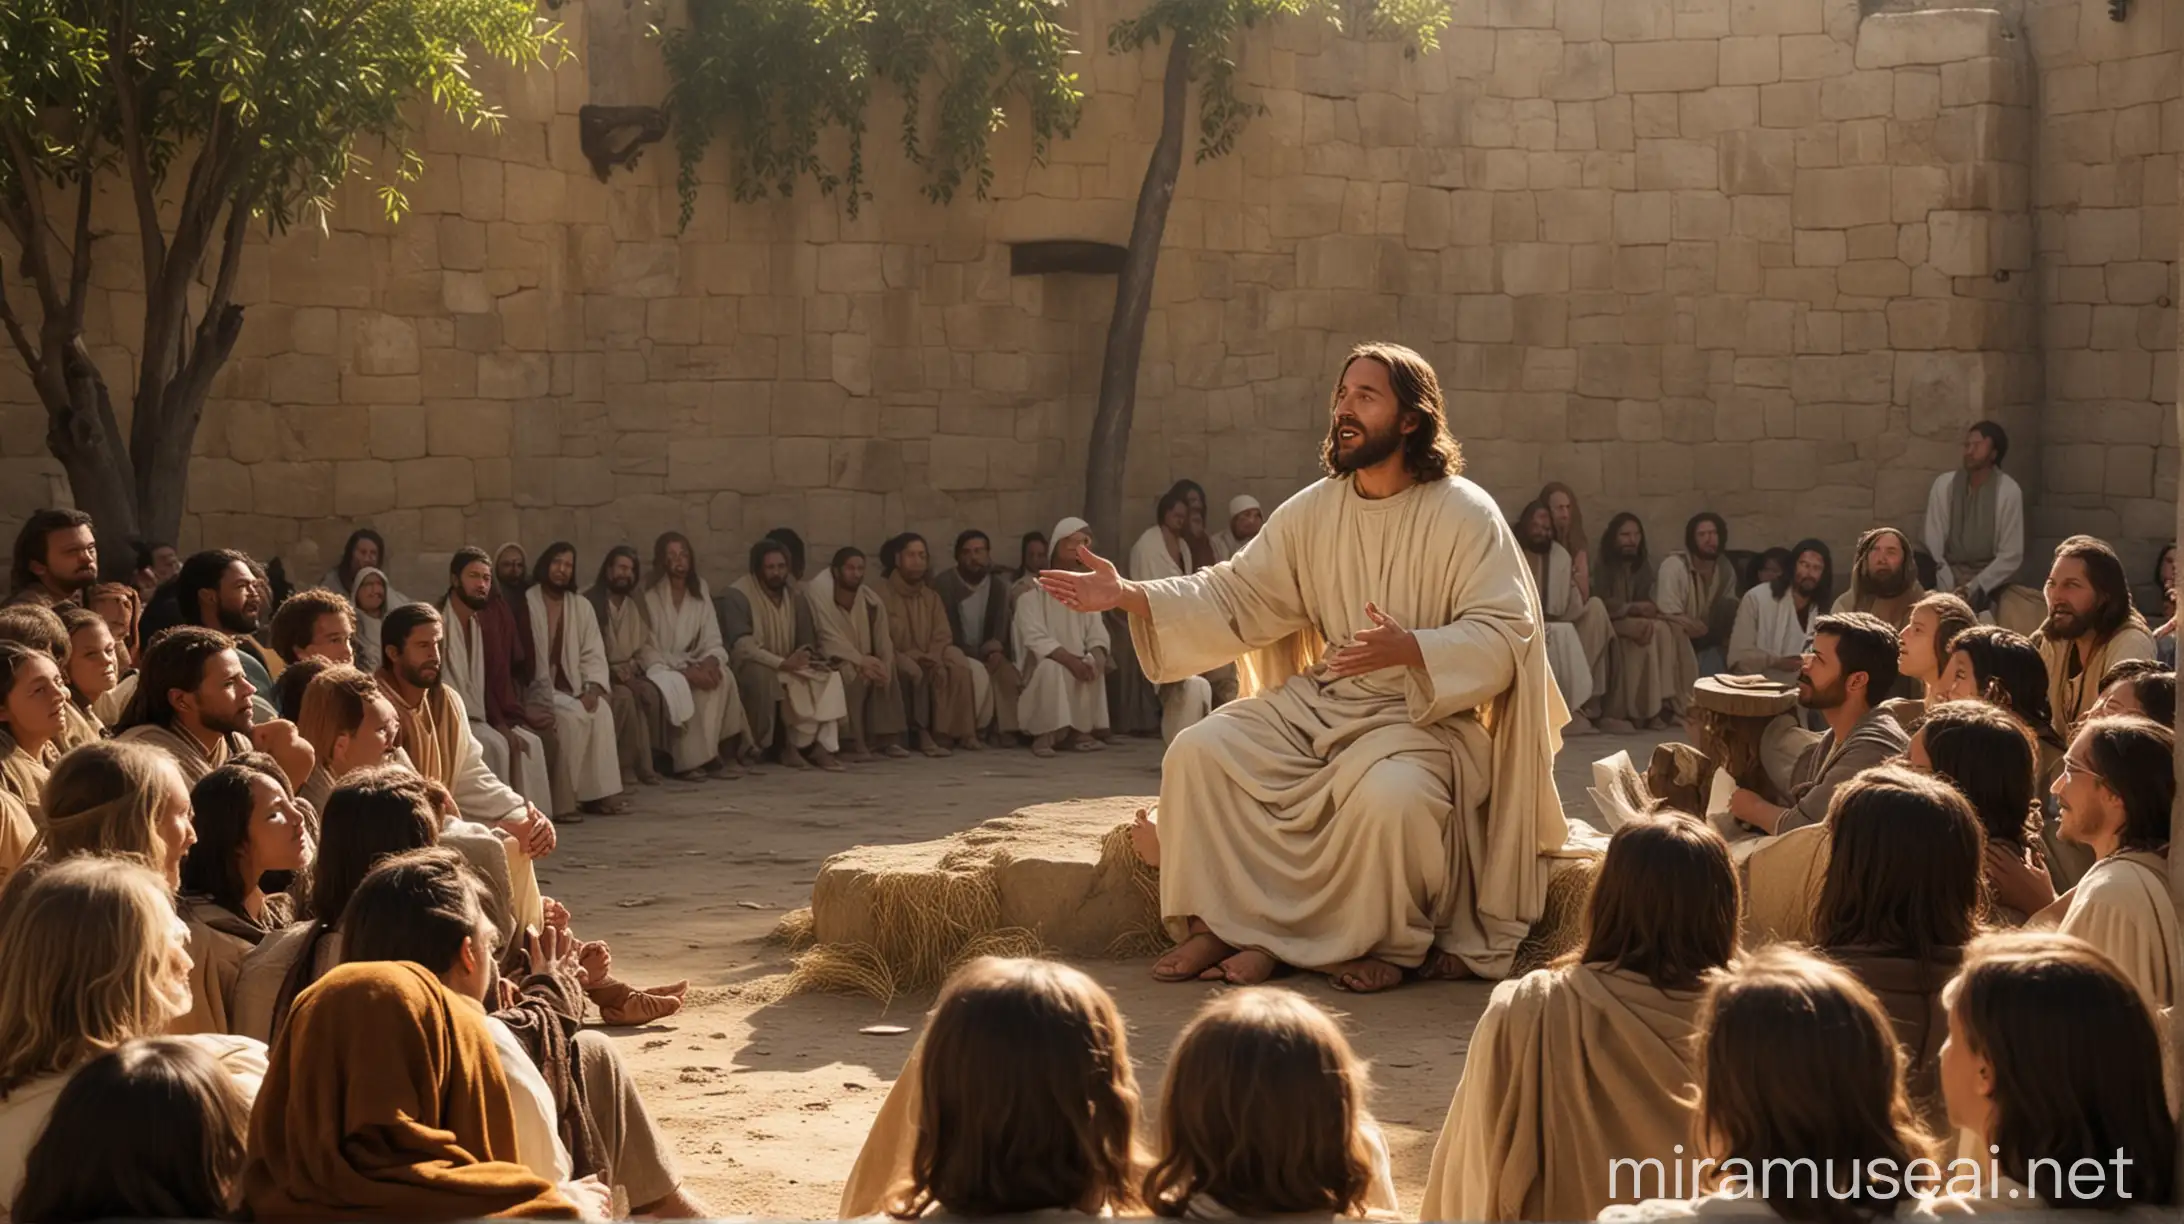 Show me an image of Jesus sitting and preaching to people 
